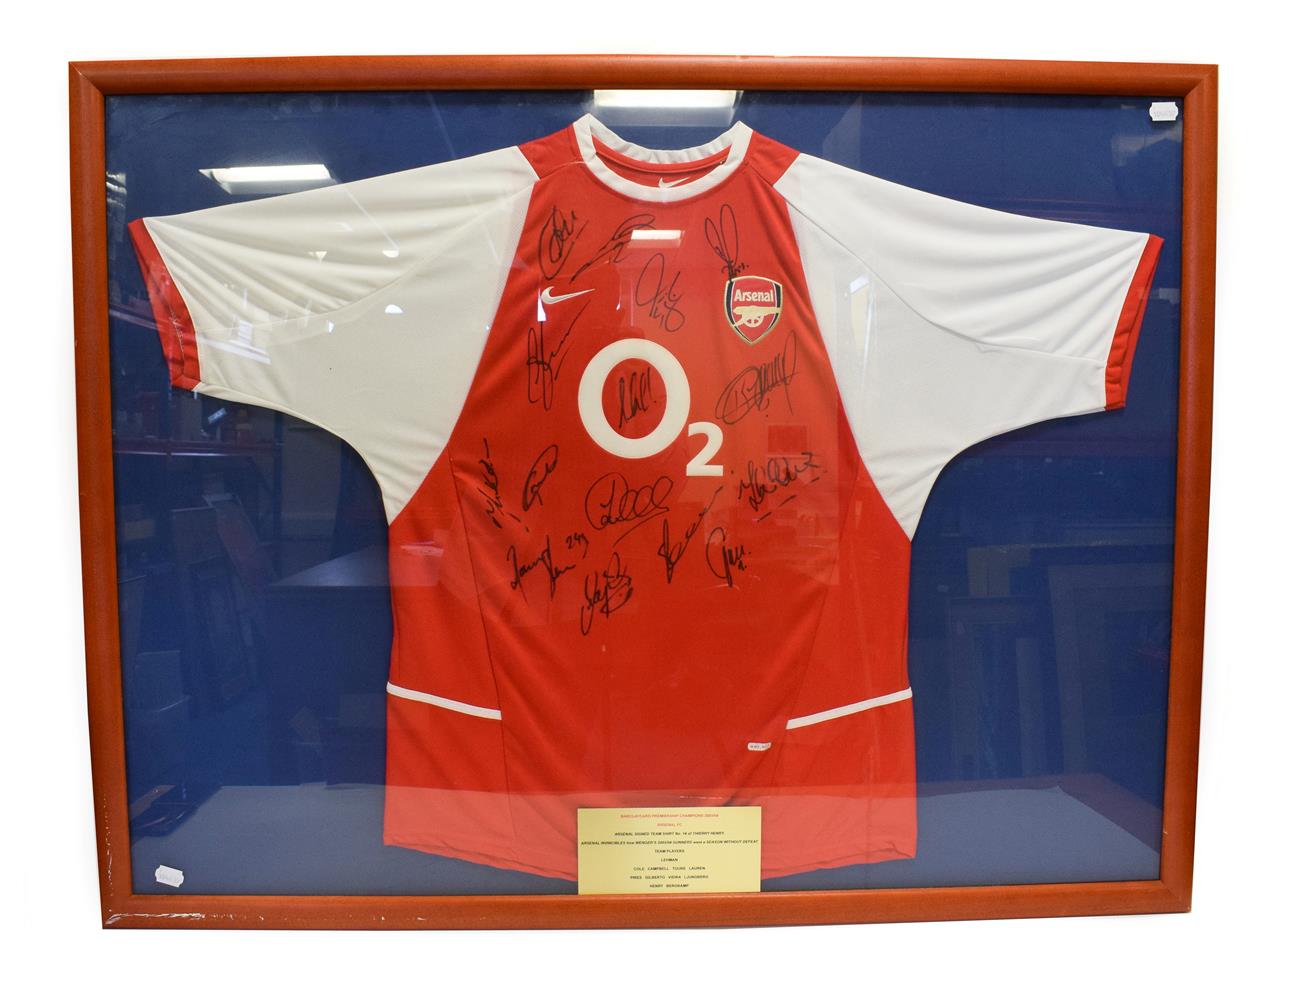 Lot 5004 - Arsenal Invincible Signed Football Shirt from the 2003/4 season a No.14 Thierry Henry with 15 squad